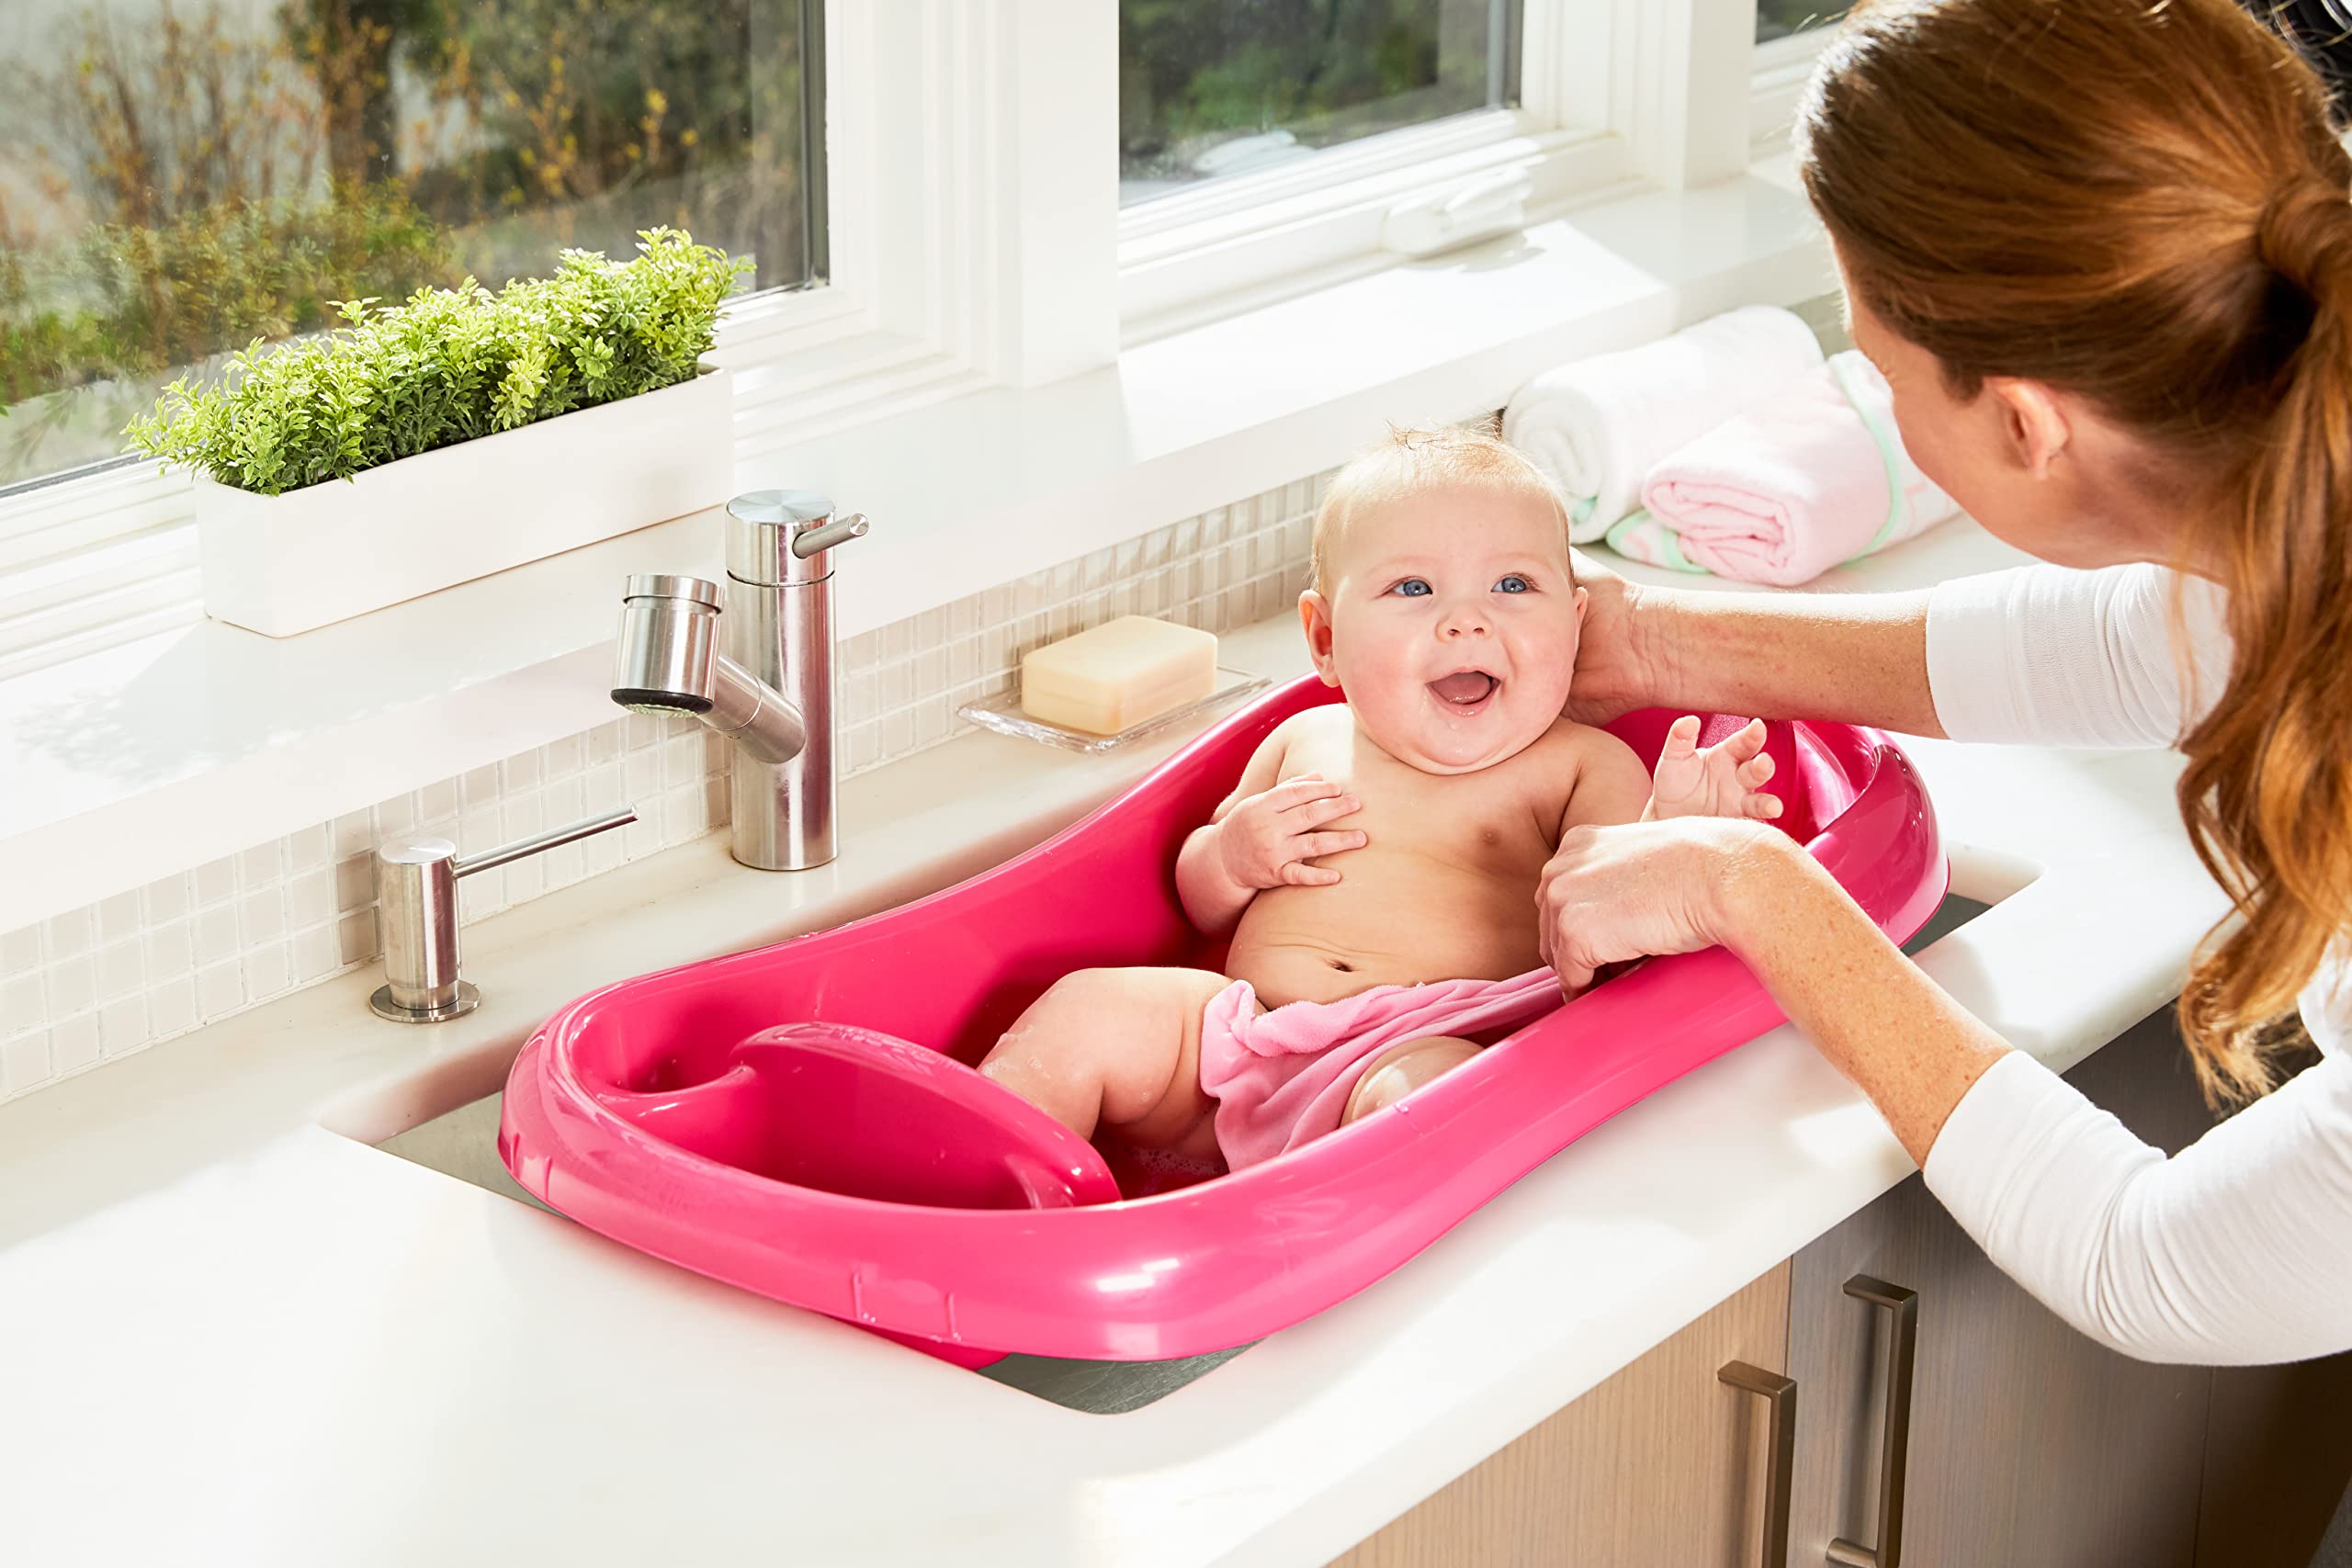 The First Years Adjustable 3-in-1 Baby Bath Tub - Convertible Baby Bath Seat for Infants to Toddlers - Includes Detachable Infant Bath Sling - Pink - Ages 0 to 9 Months